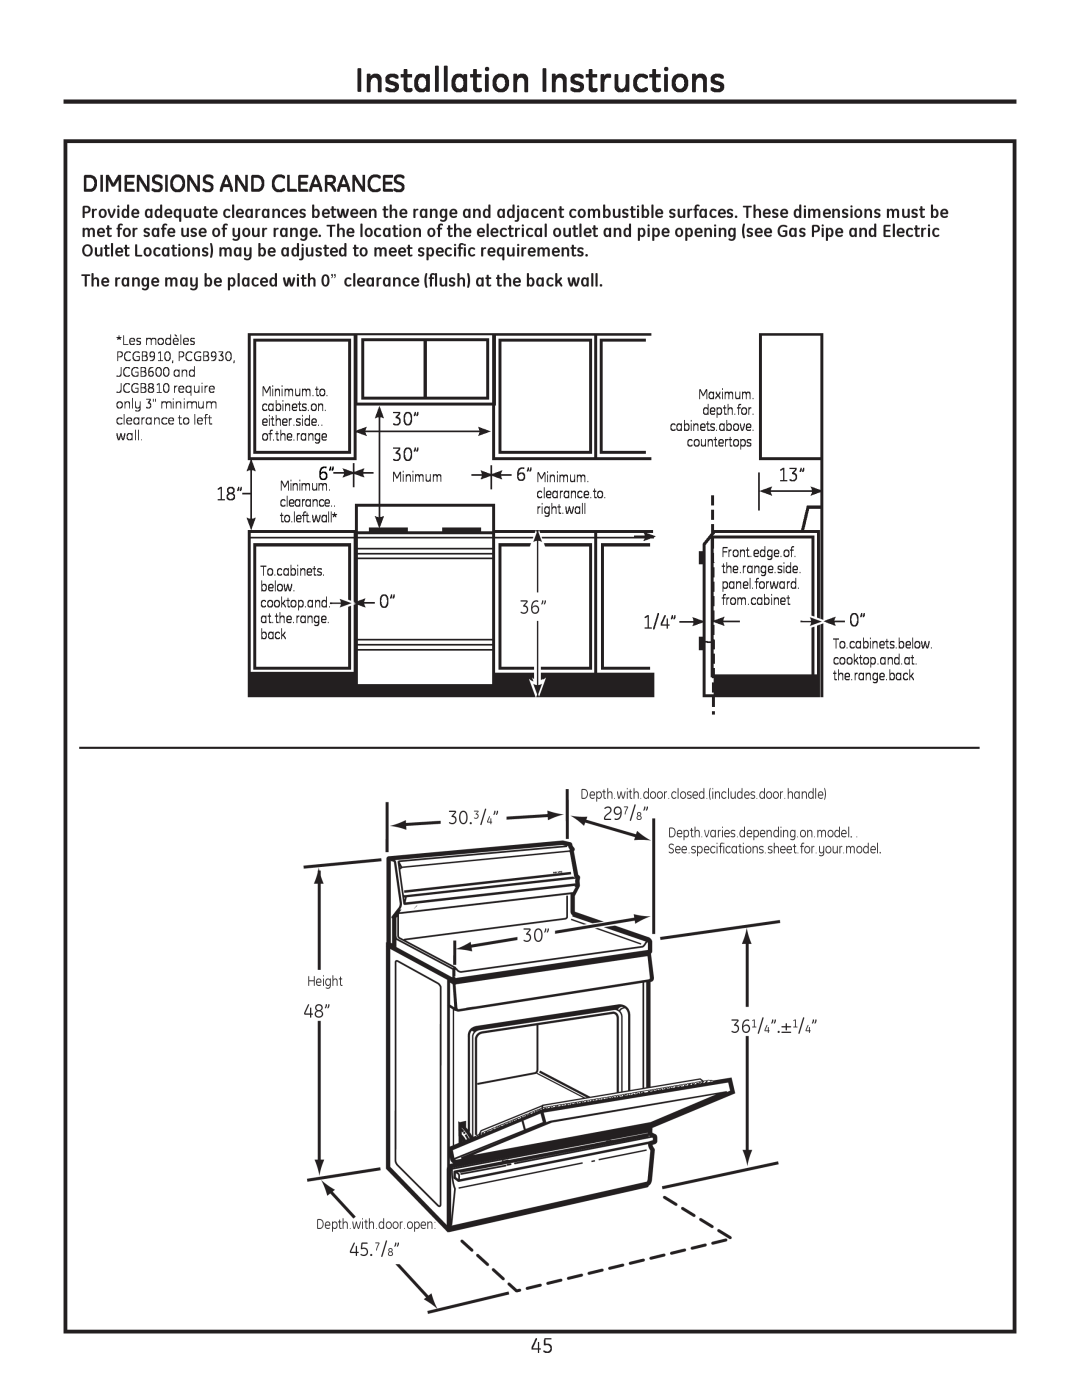 GE PCGB910 manual Installation Instructions, Dimensions And Clearances, 30.3/4” 297/8”, 361/4”.±1/4”, 45.7/8” 